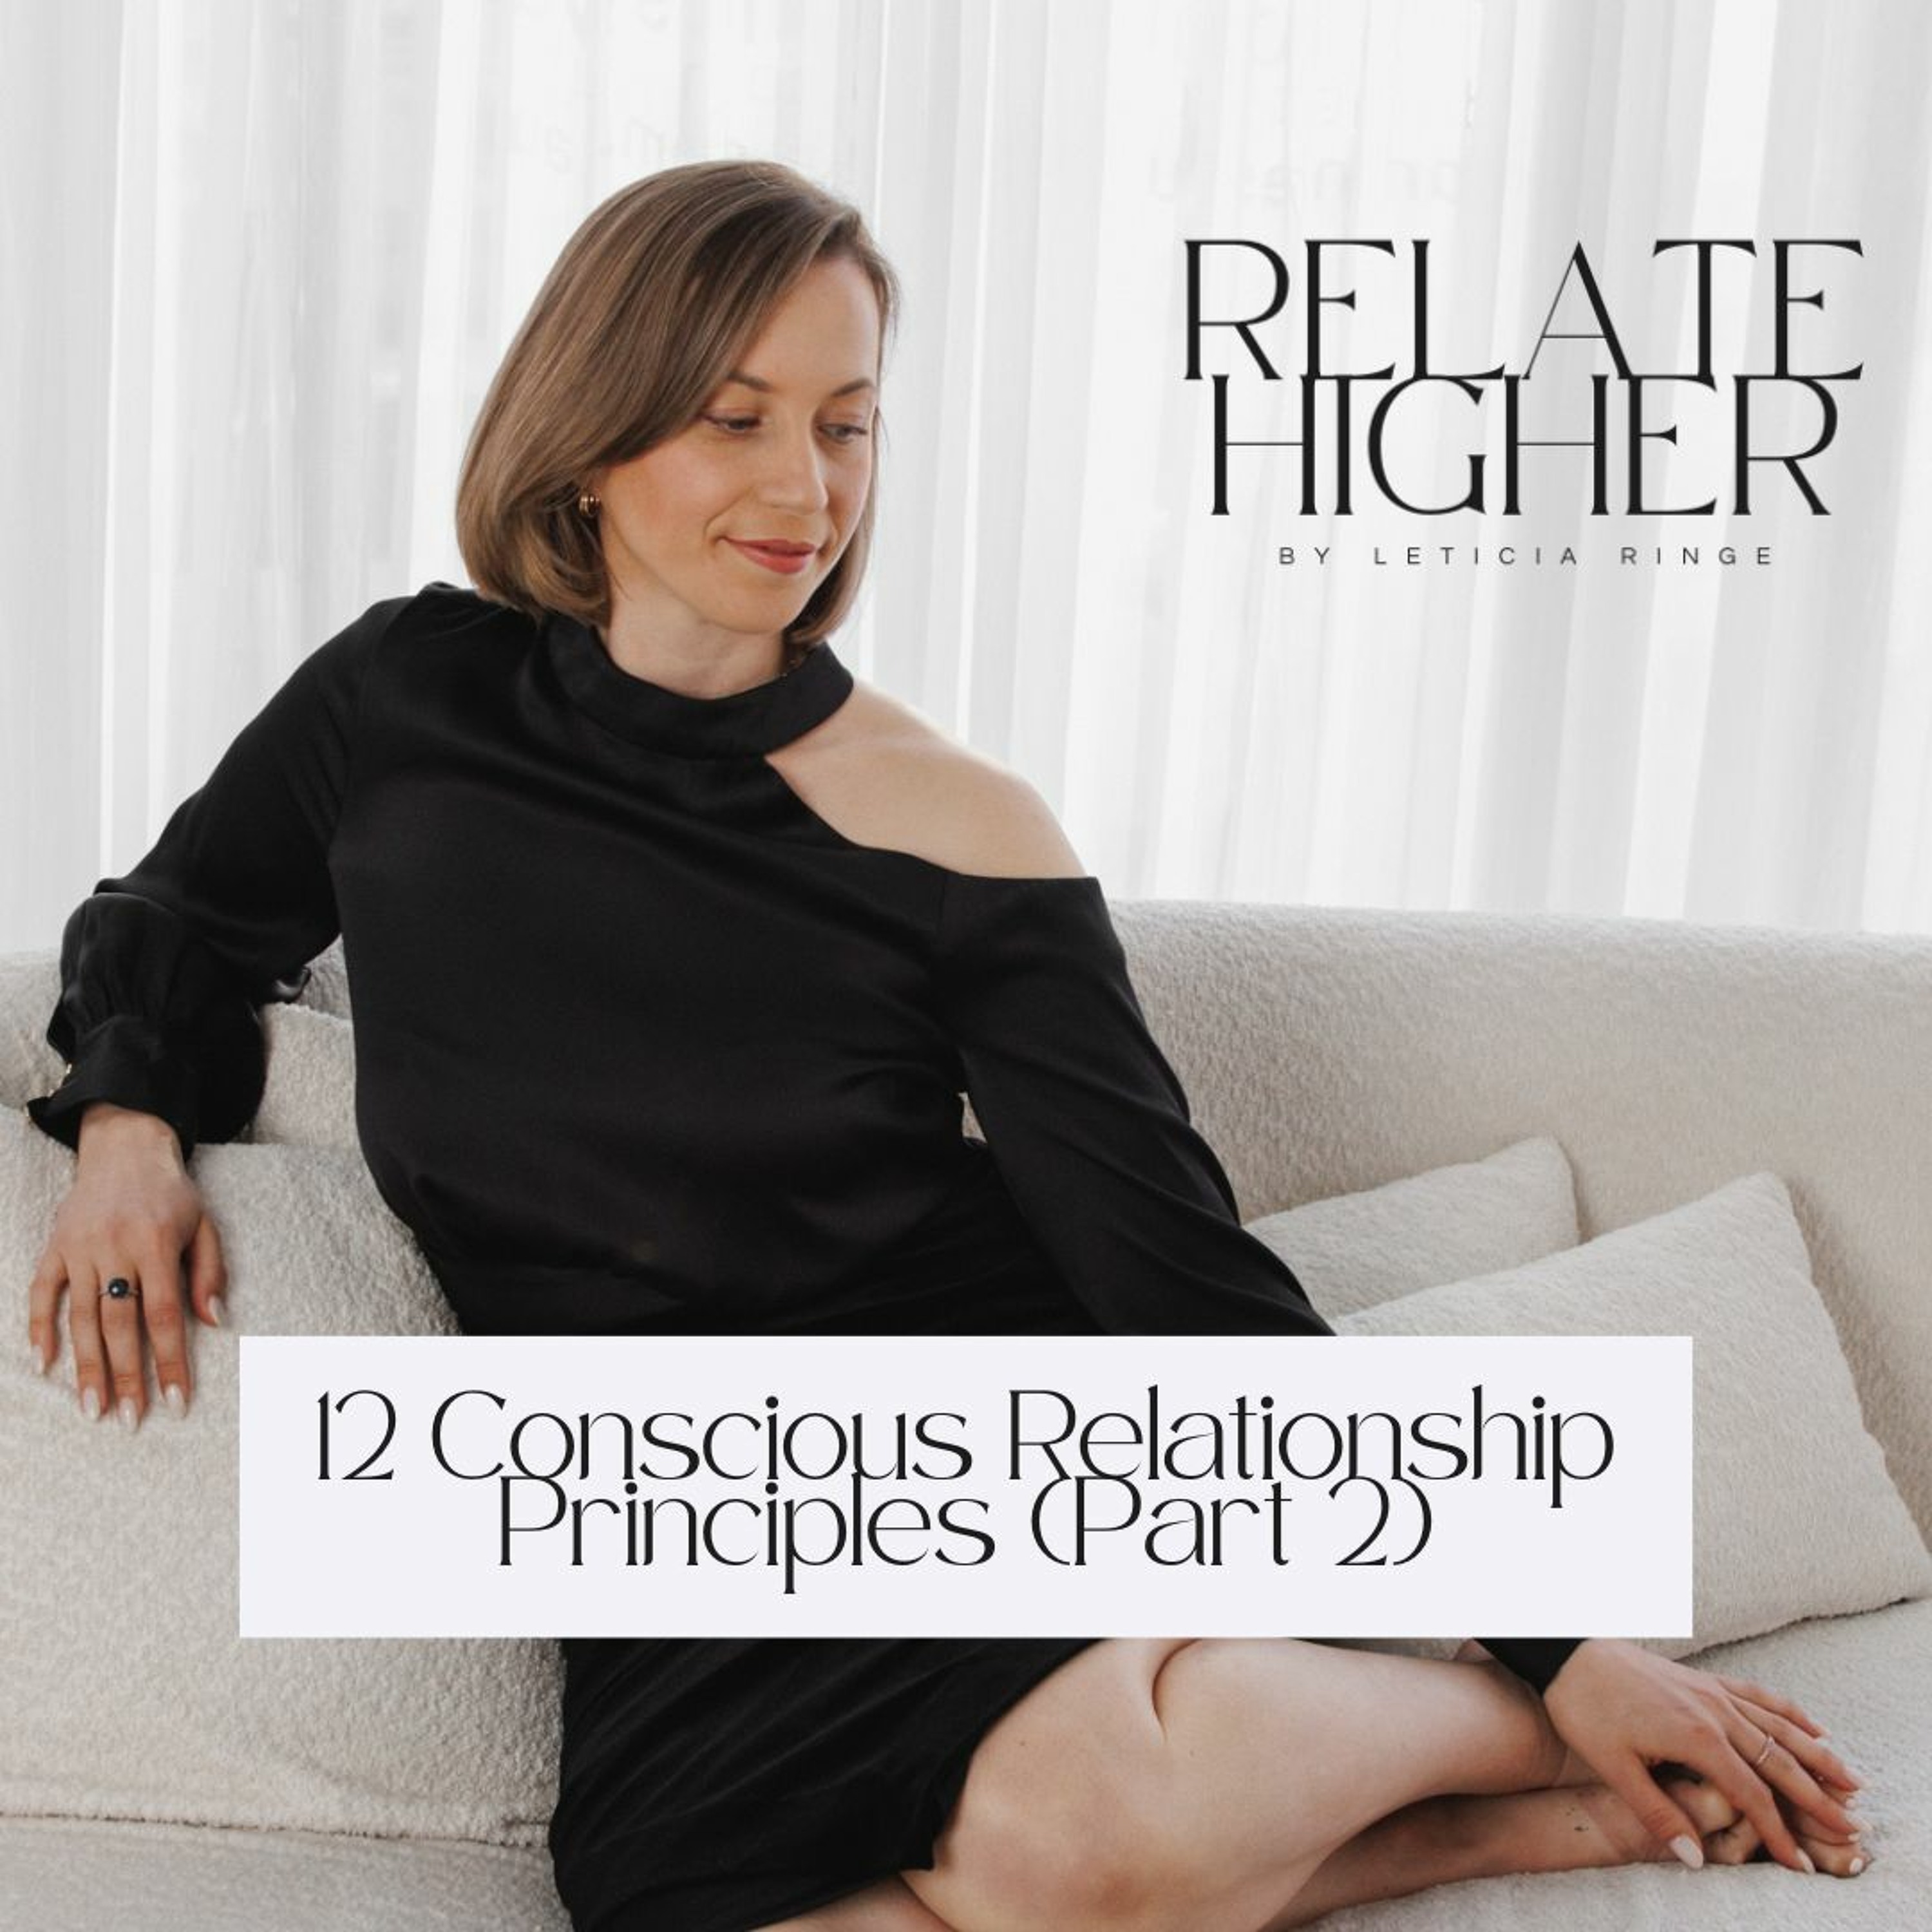 RH 15: The 12 Principles of a Conscious Relationship (Part 2)